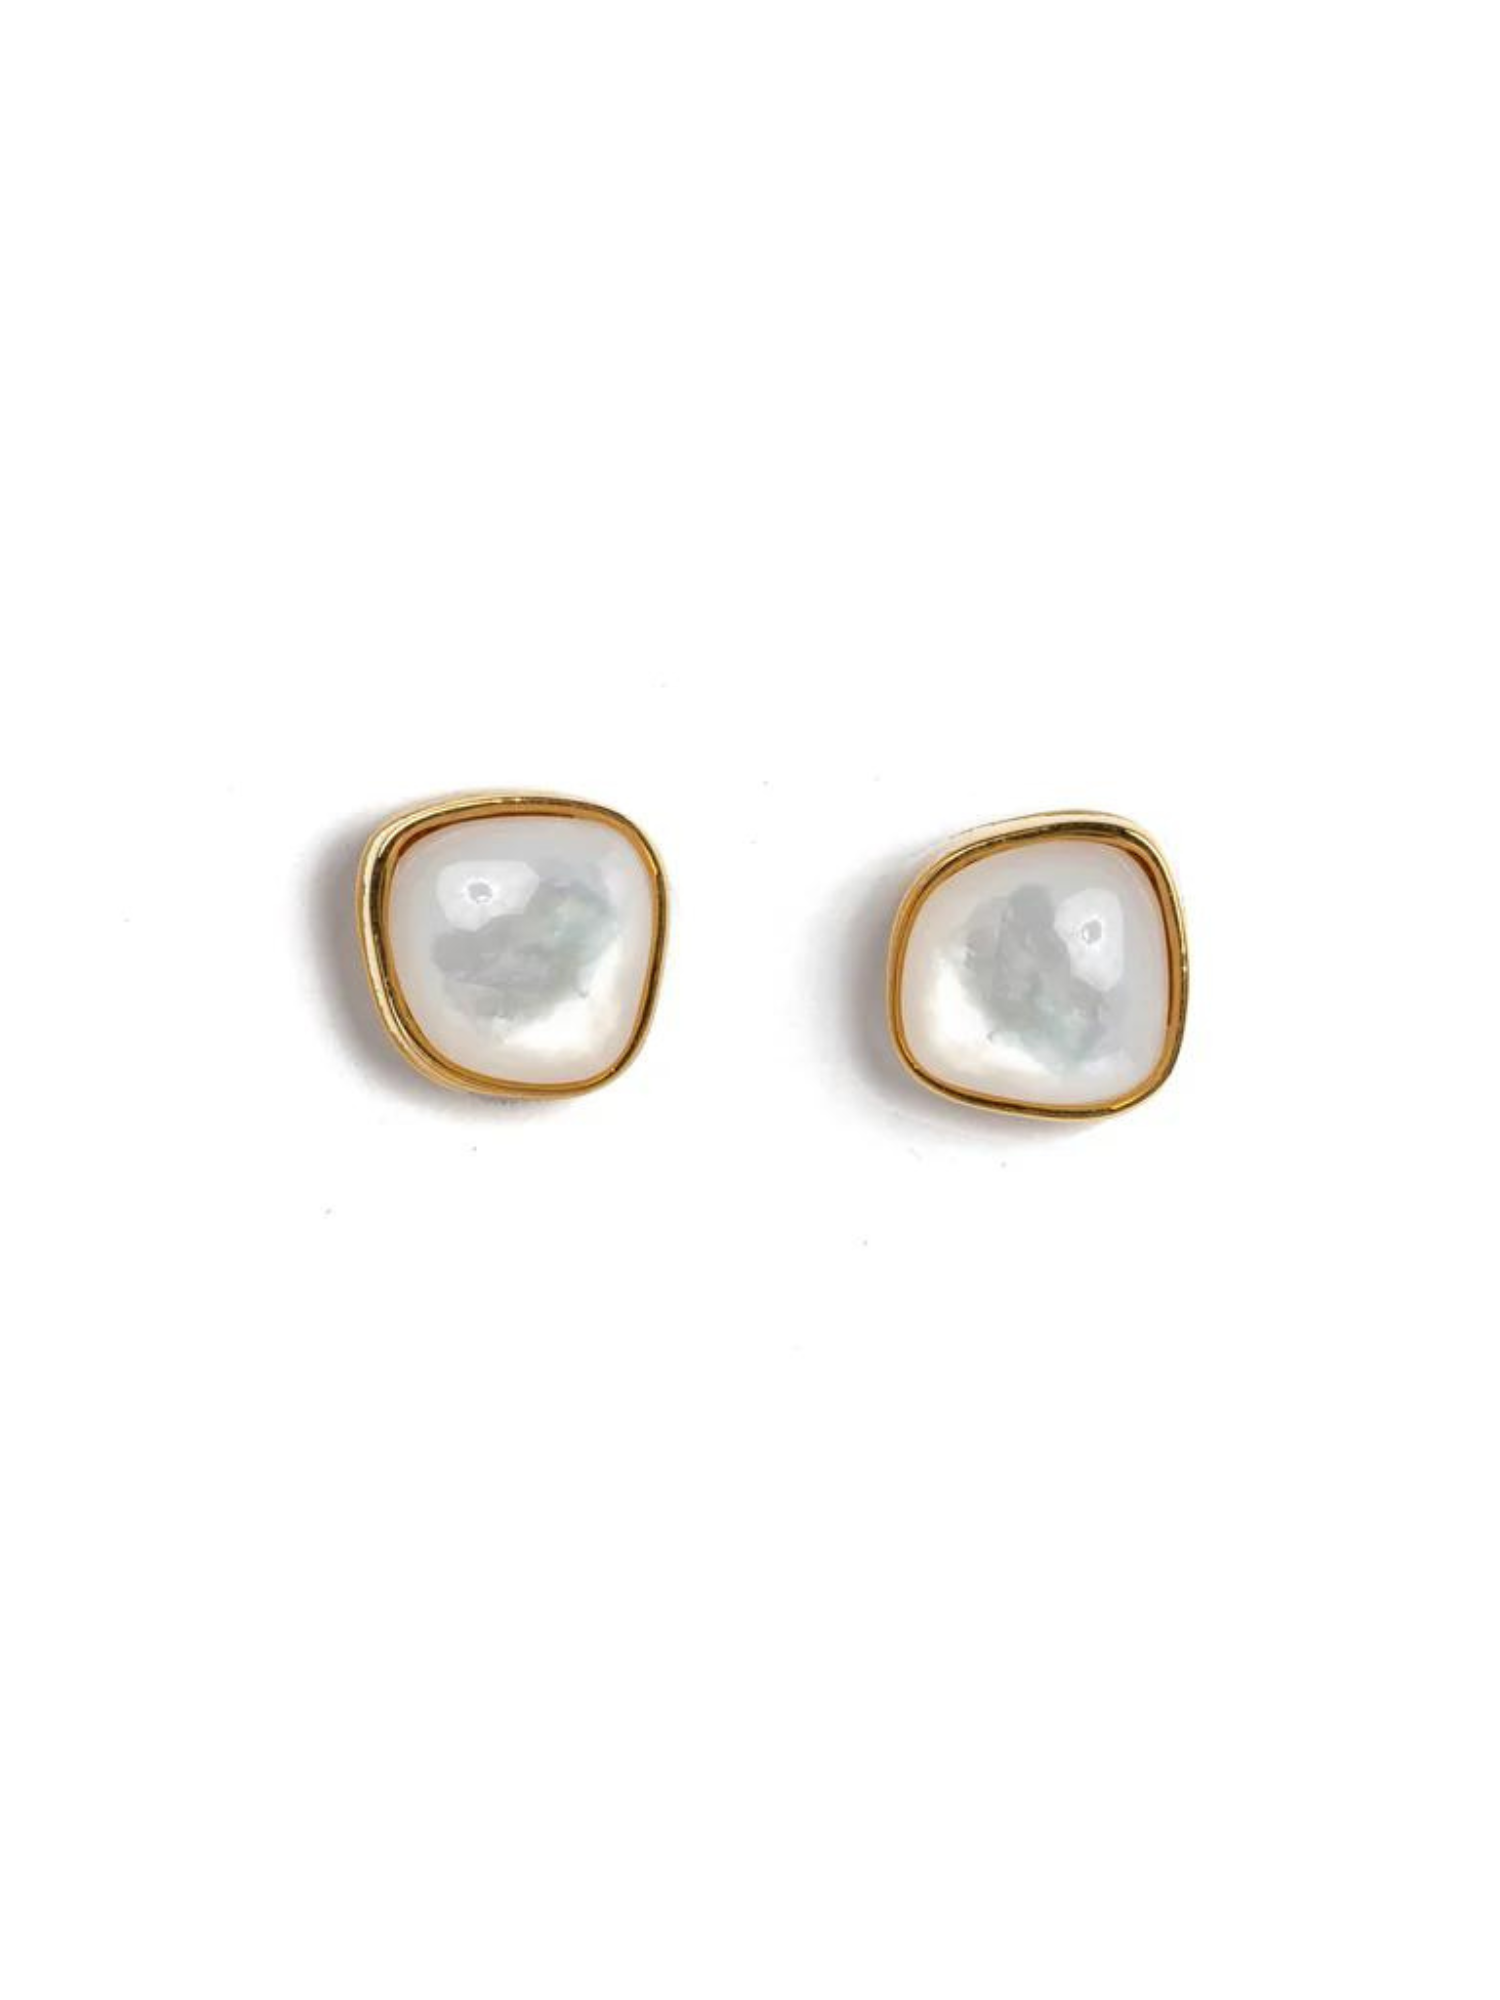 Lizzie Fortunato Bay Studs in Mother-of-Pearl